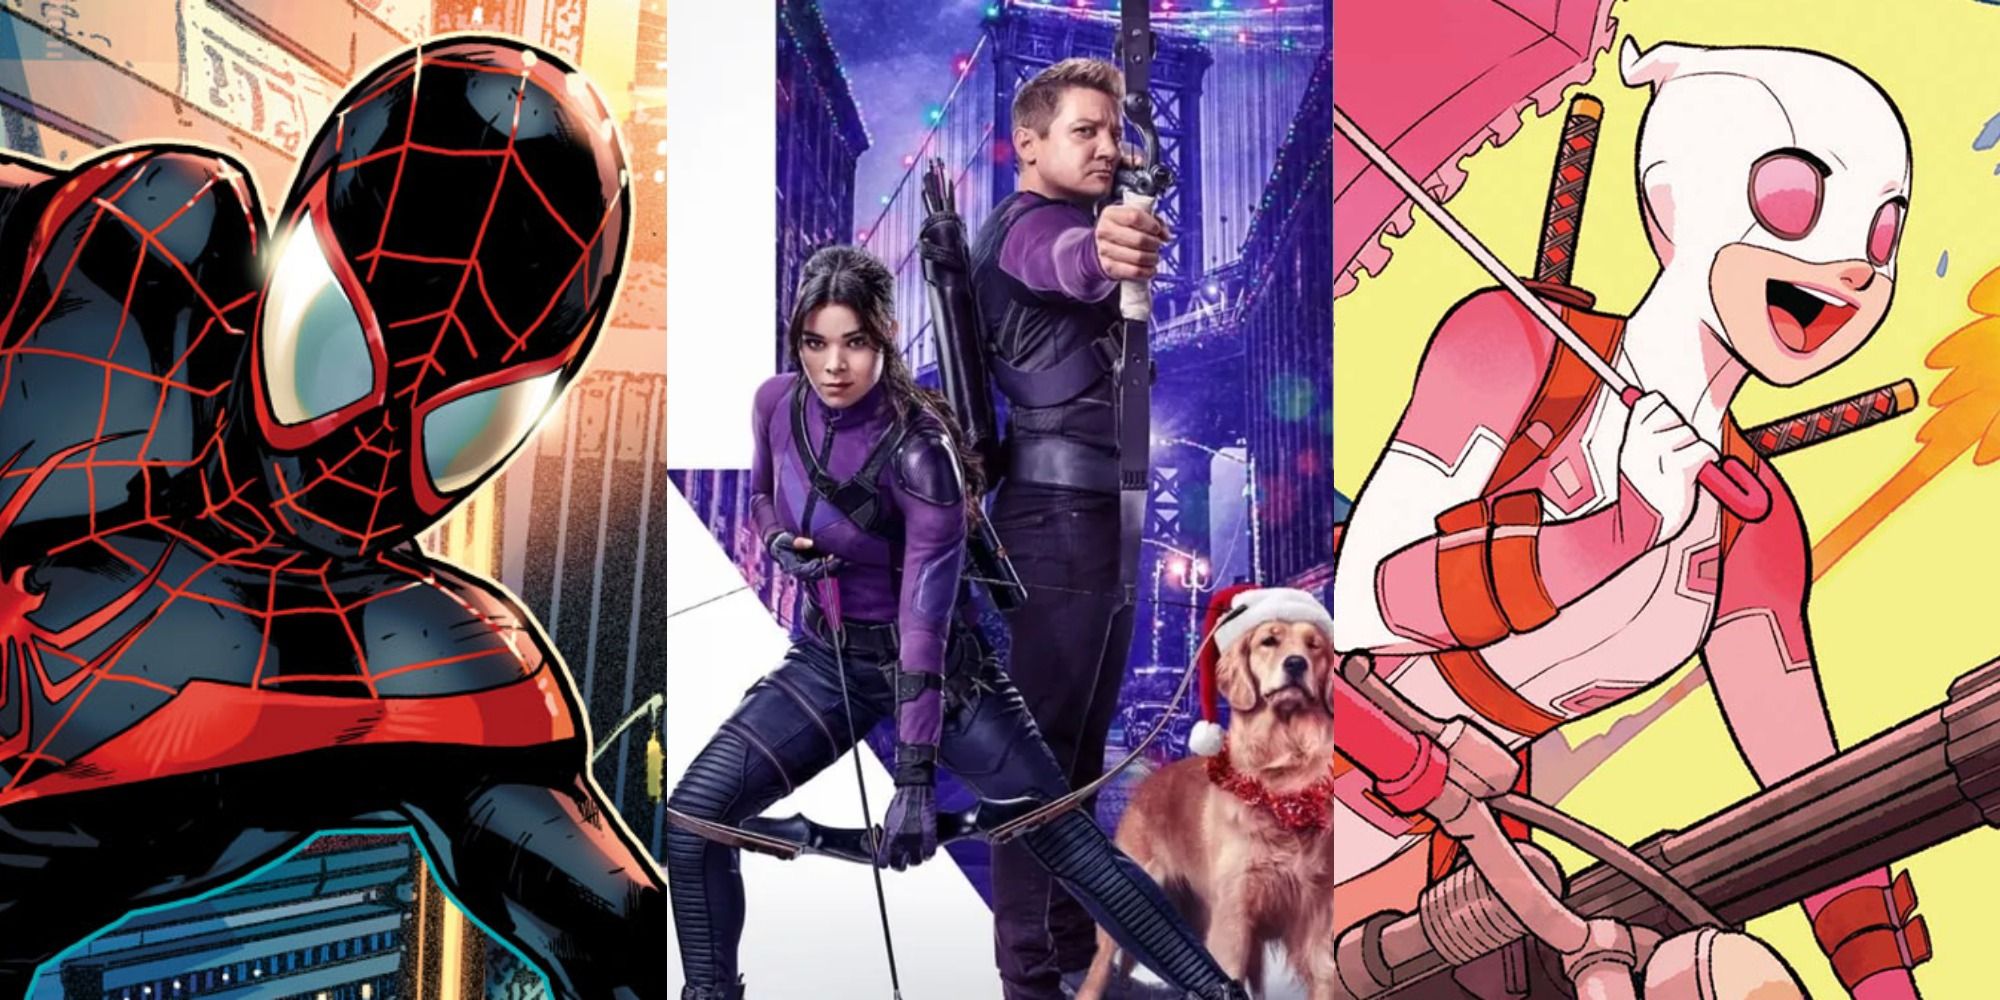 Split image of Clint and Kate from Hawkeye series, Miles Morales and Gwenpool from Marvel Comics.